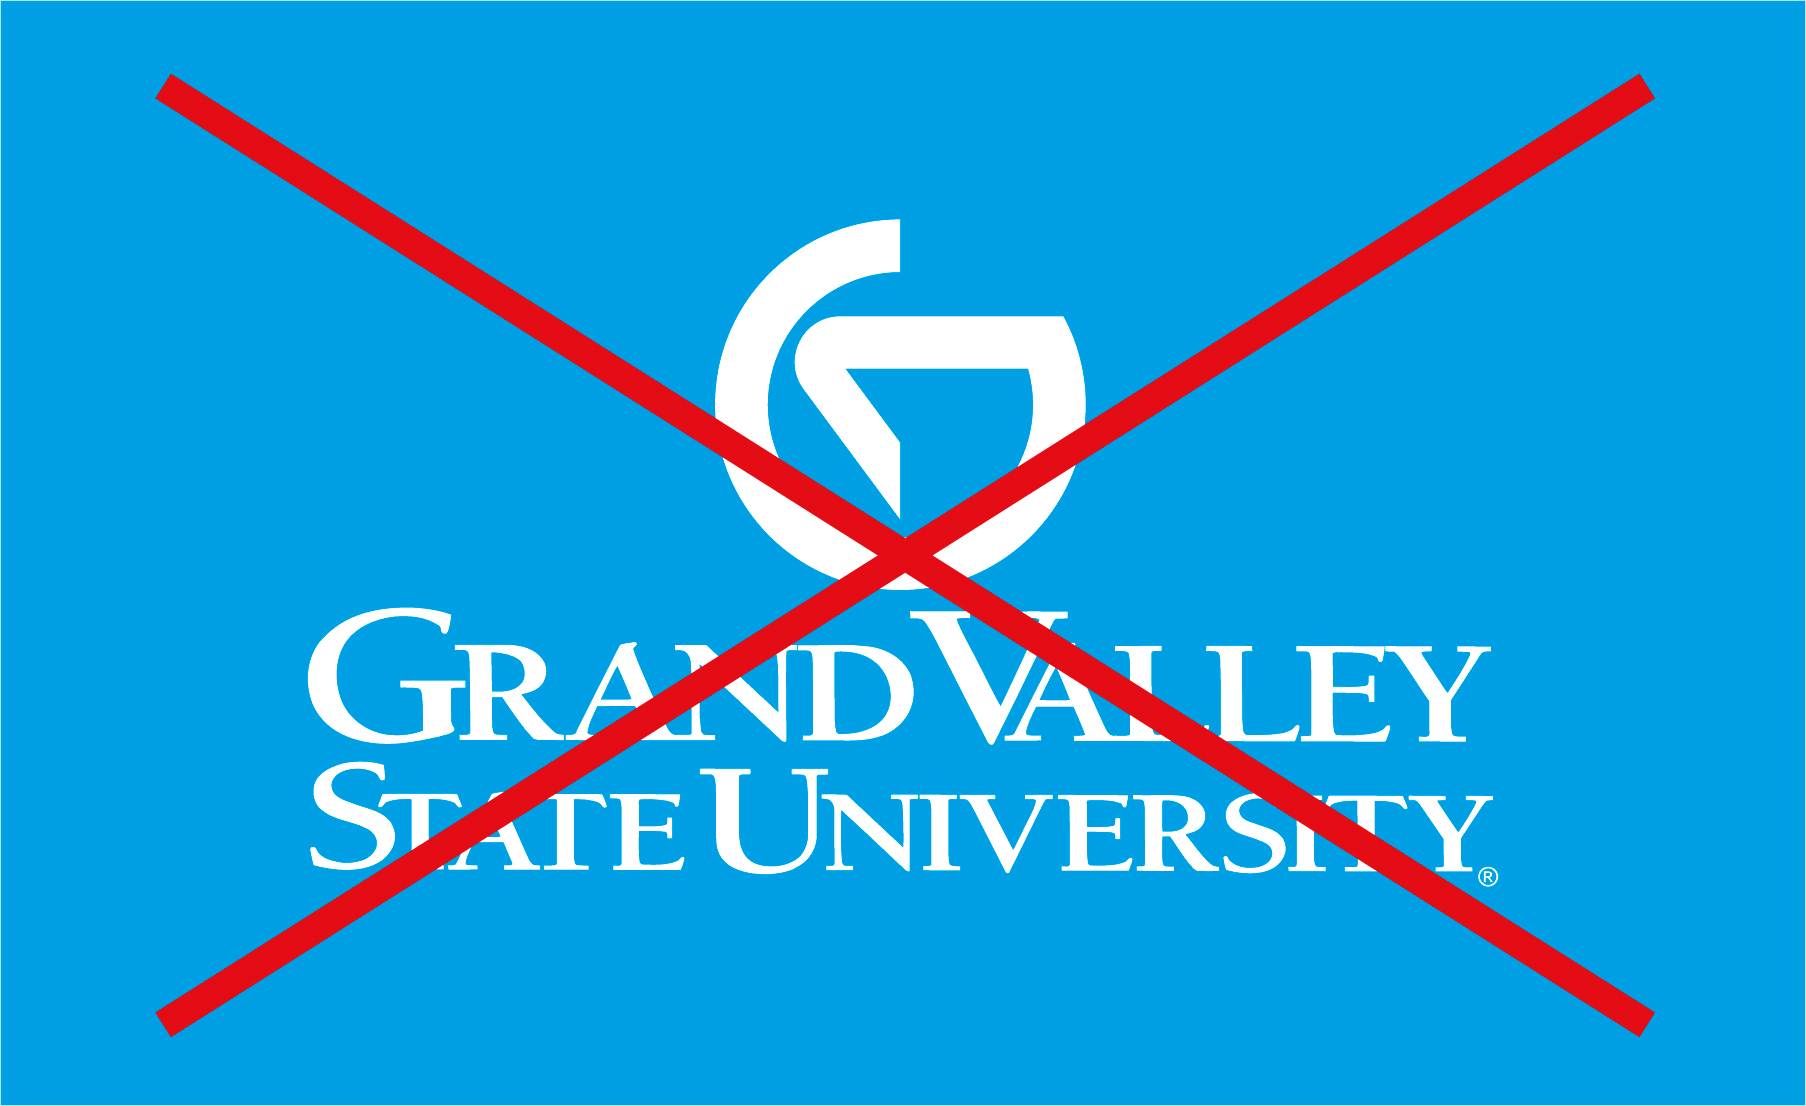 A Grand Valley logo with parts of it deleted, overlayed with a red X.